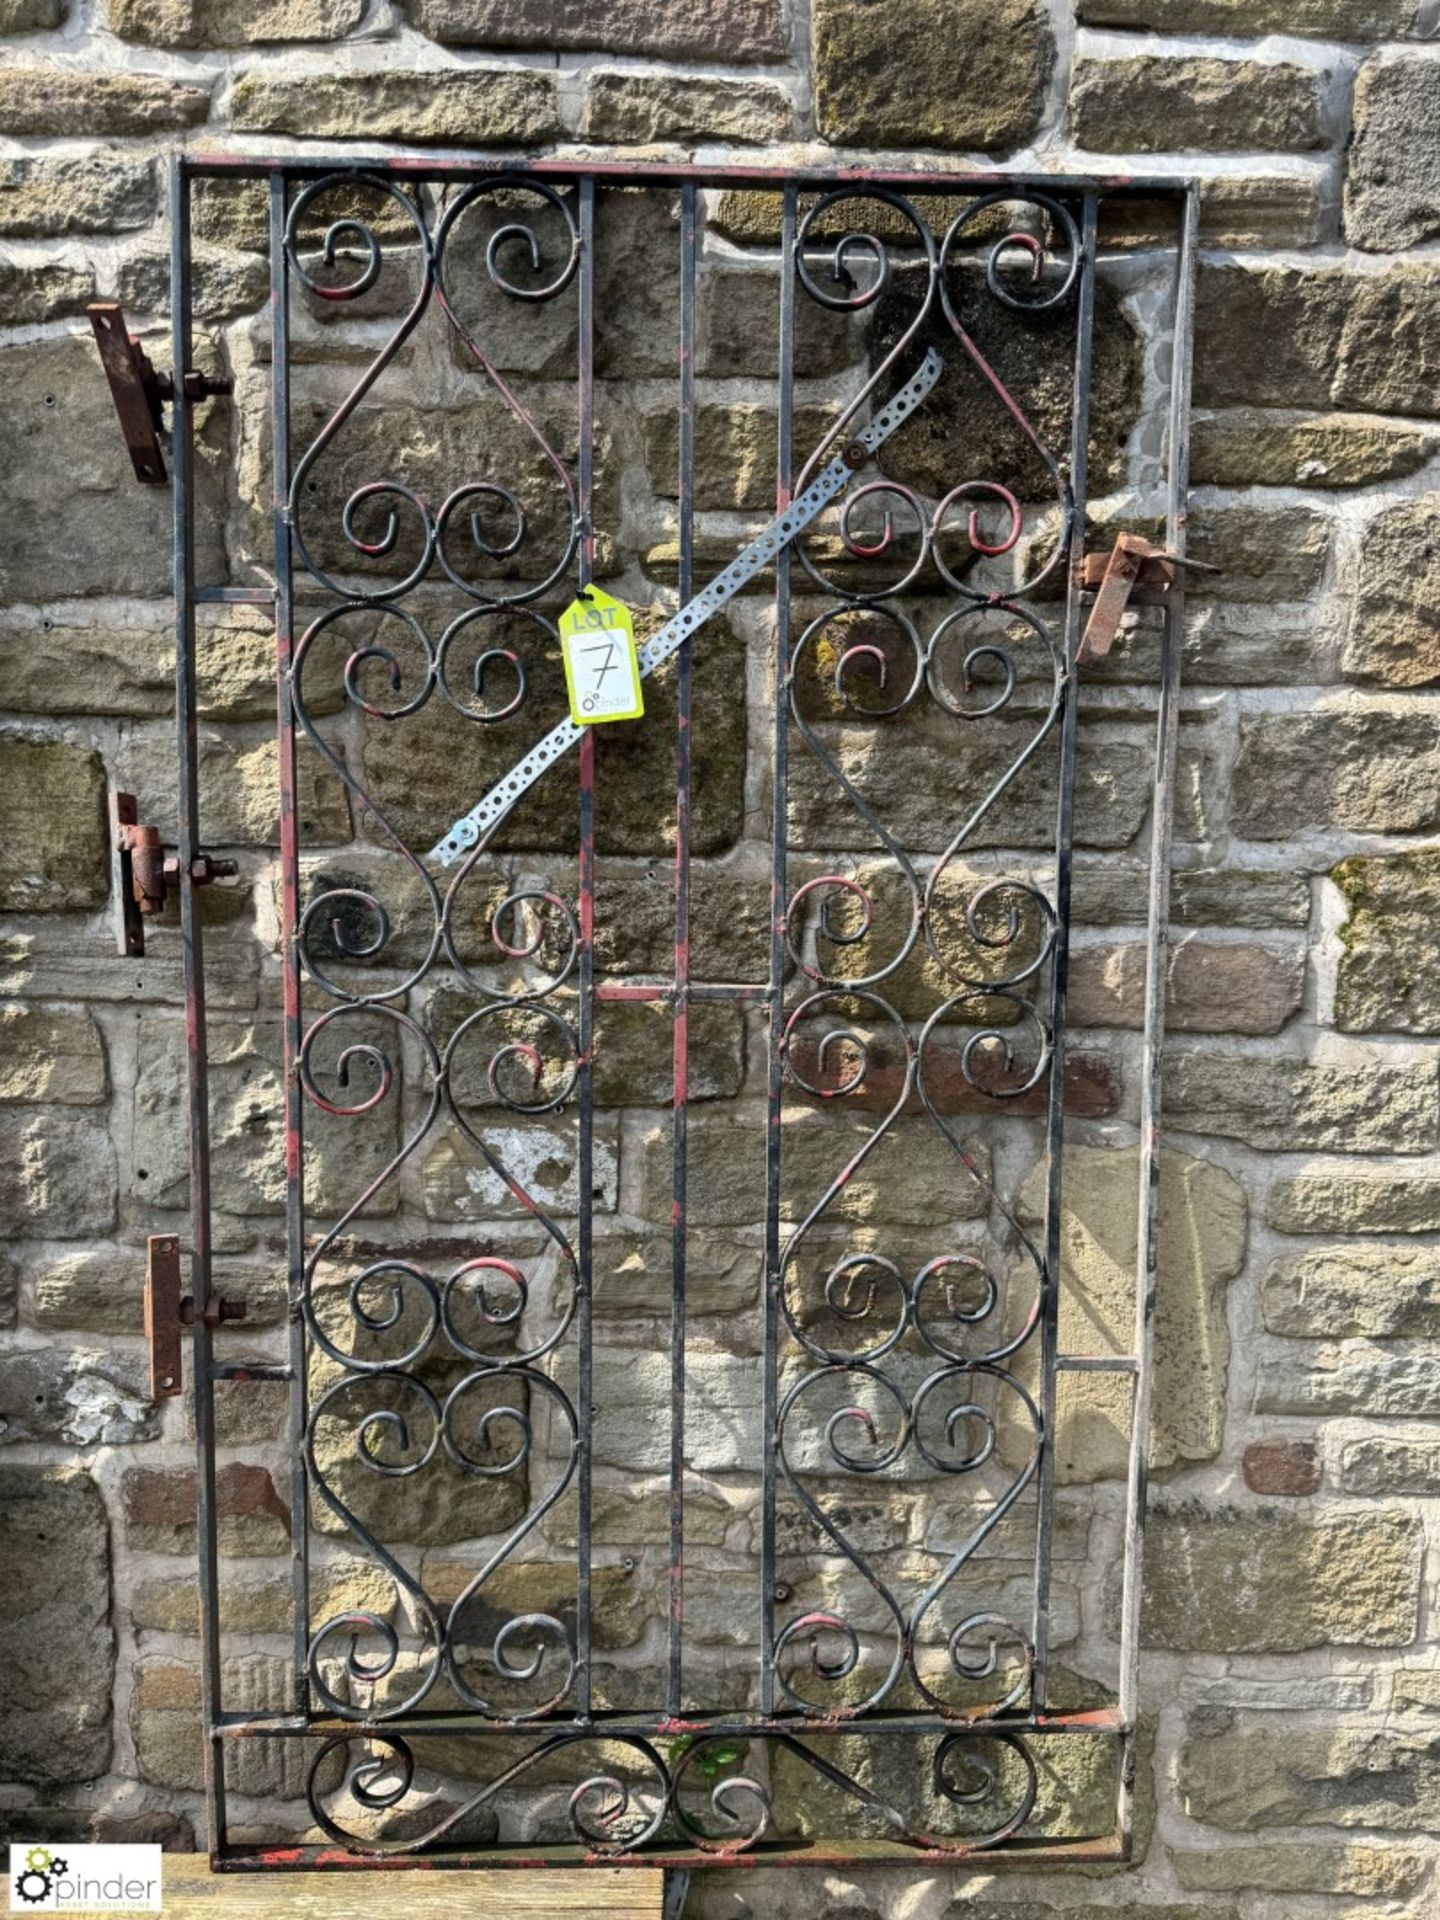 A decorative wrought iron Pedestrian Gate, approx. 62in x 36in wide, circa mid to late 1900s